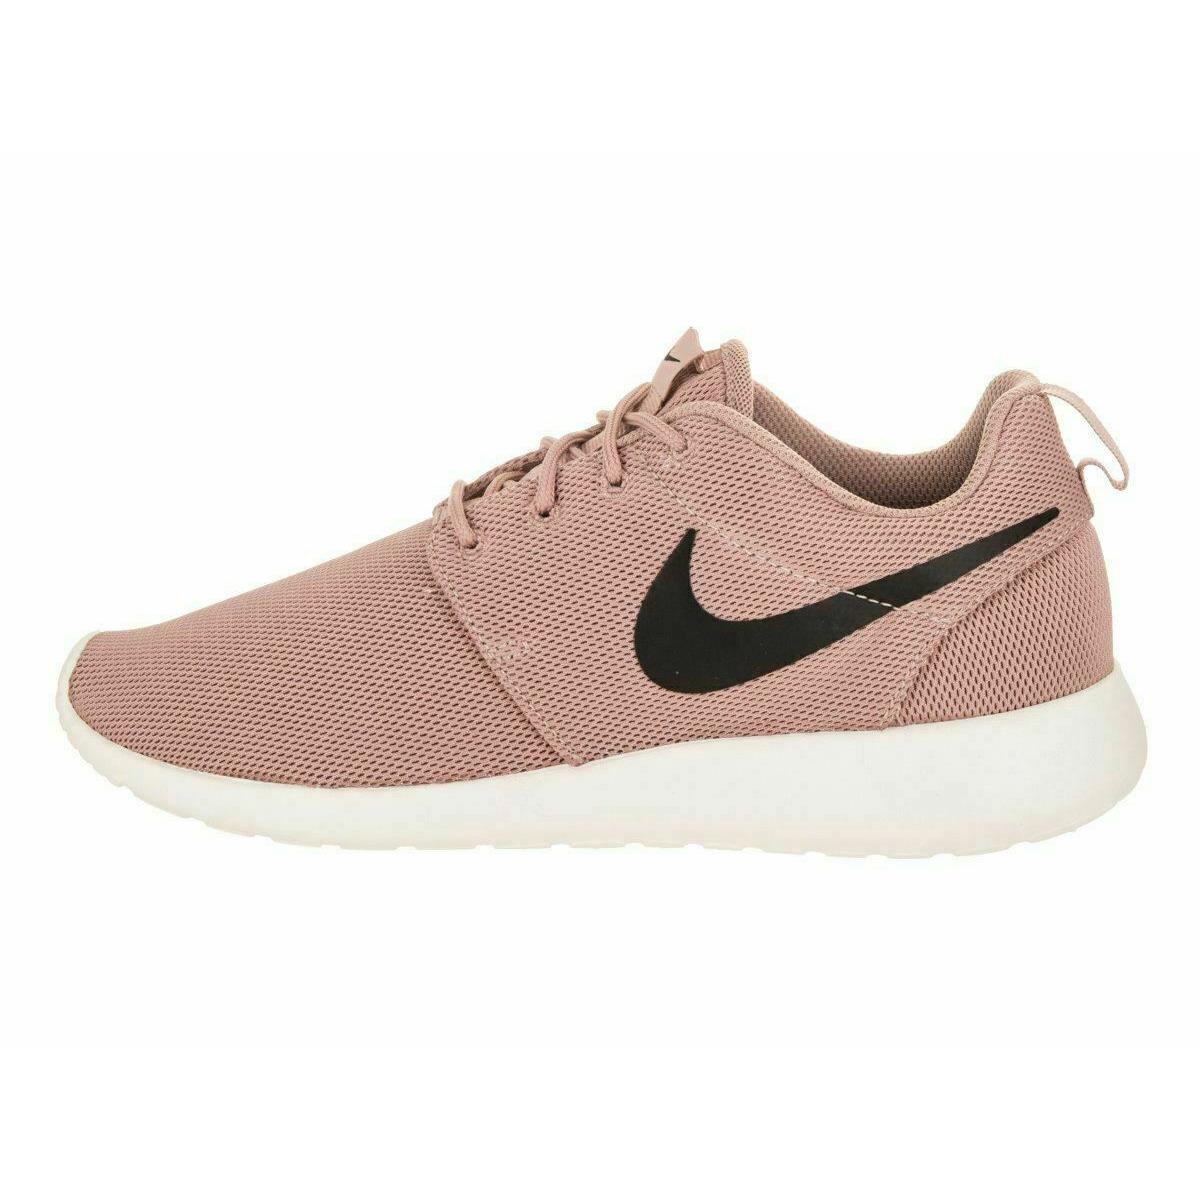 Nike shoes Roshe One - Brown & White 10